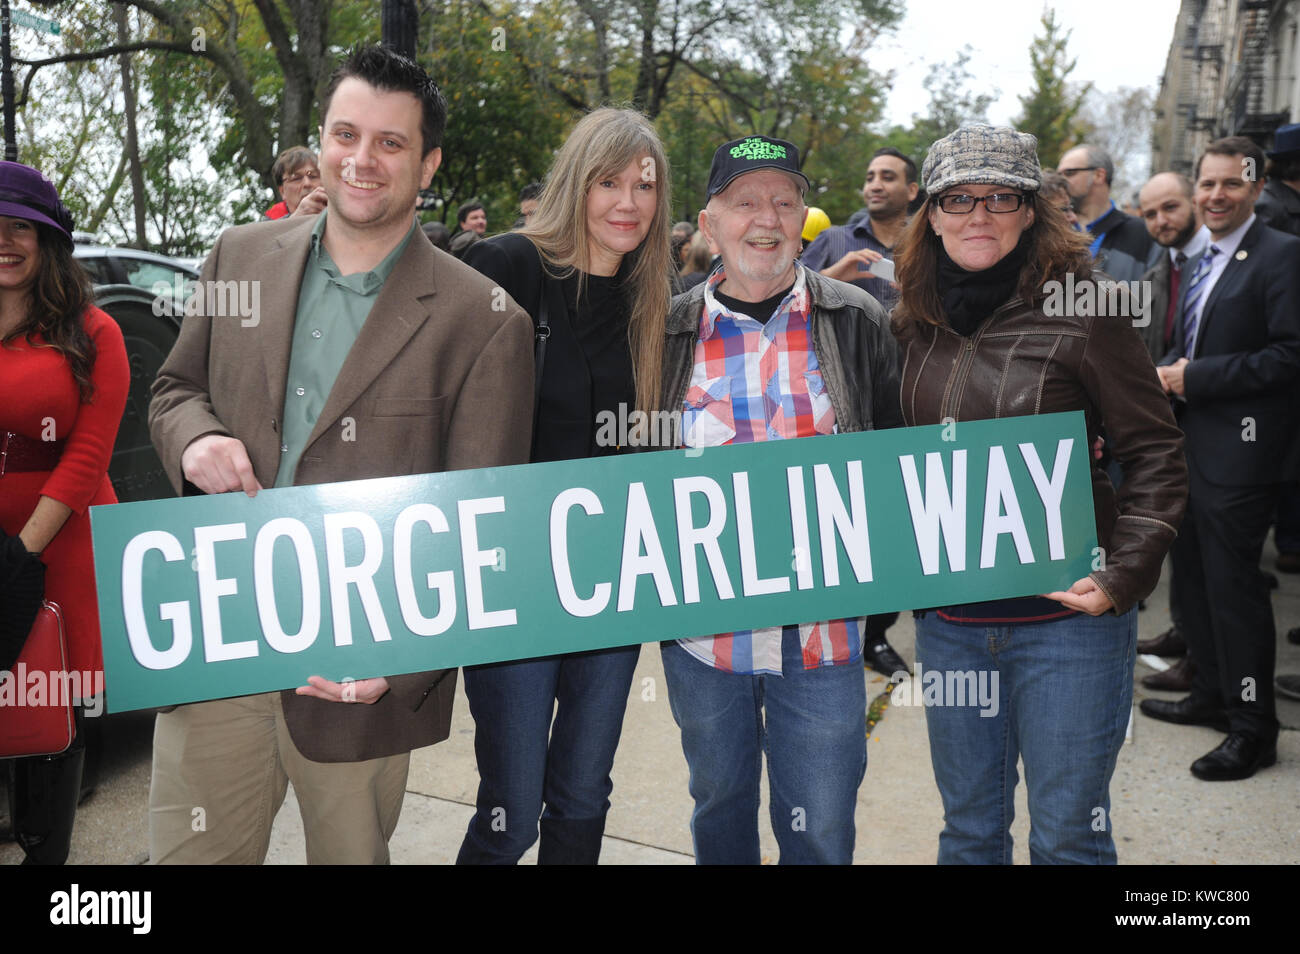 NEW YORK, NY - OCTOBER 22: Al Jones, Colin Quin, George Carlin, George Carlin Way, Gilbert Gottfried, Judah Friedlander, Marla Diamond, Morningside Heights, Robert Klein, and relatives of late stand-up comedian George Carlin mark the renaming of a street as 'George Carlin Way' at Morningside Avenue and 121st Street on October 22, 2014 in New York City.  People:  George Carlin Way Stock Photo